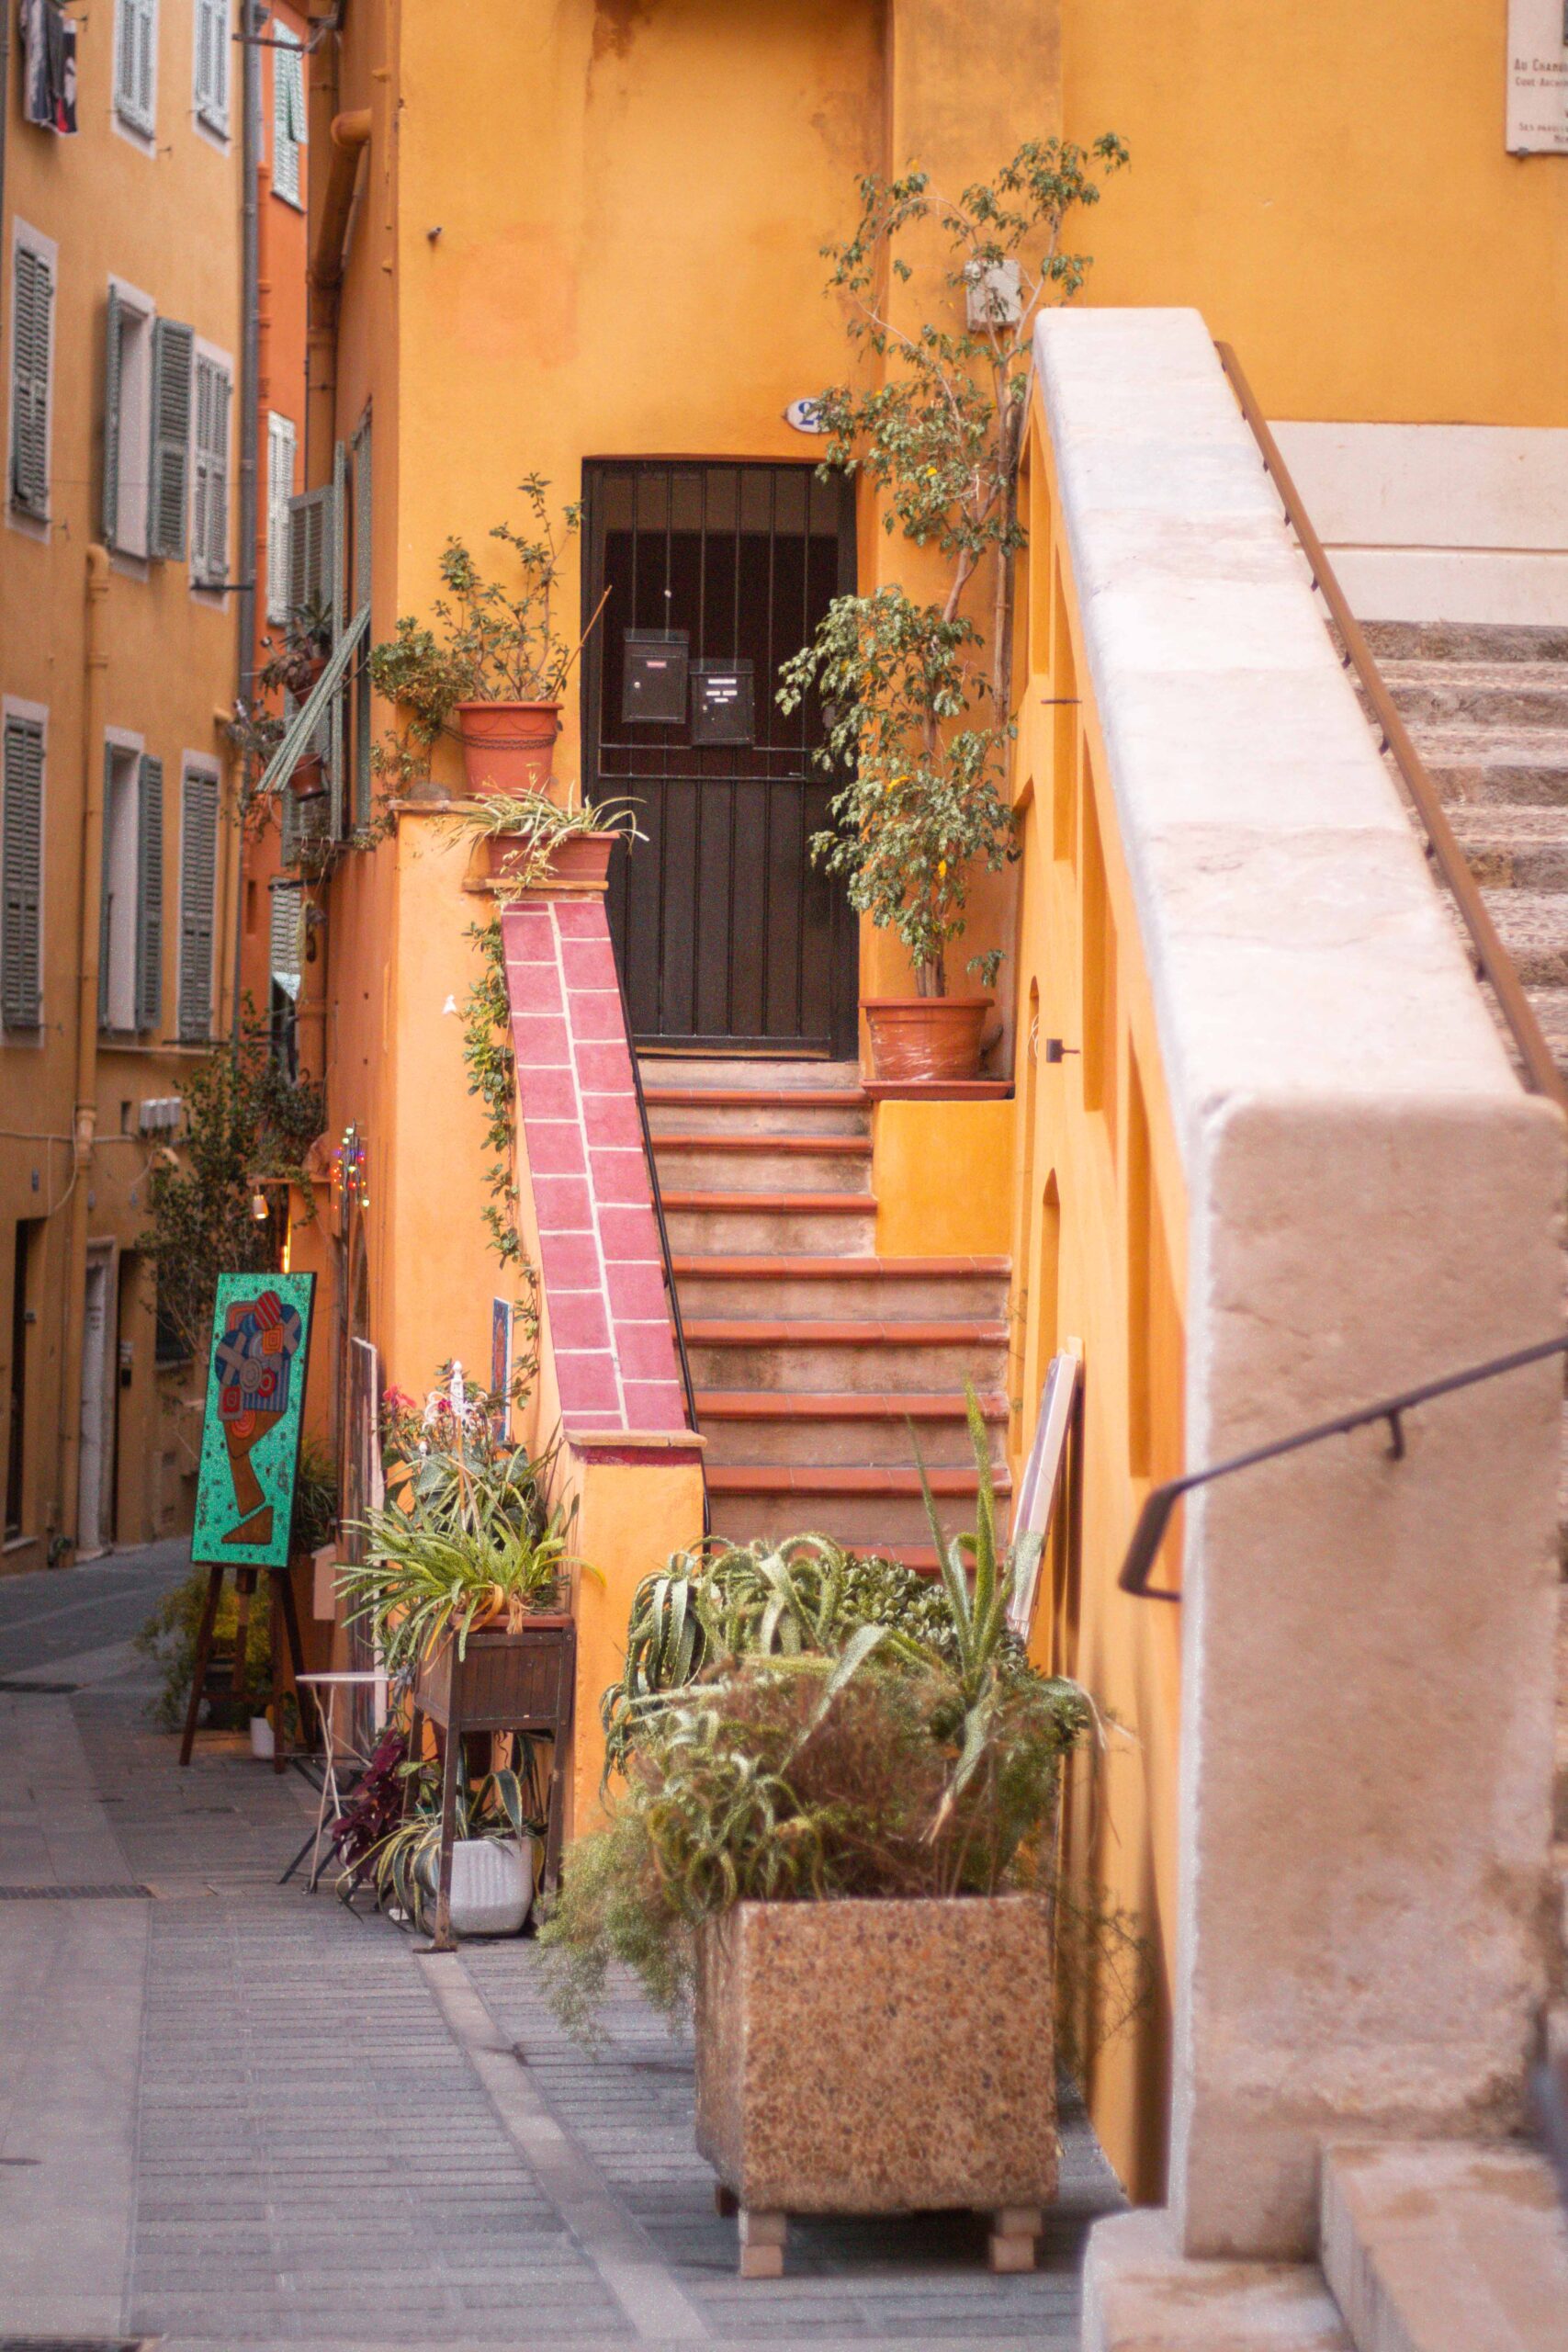 Details of a colourful street ("Rue Longue"), featuring plants, staircases and the entrance of an art gallery shop in the Old Town of Menton, France